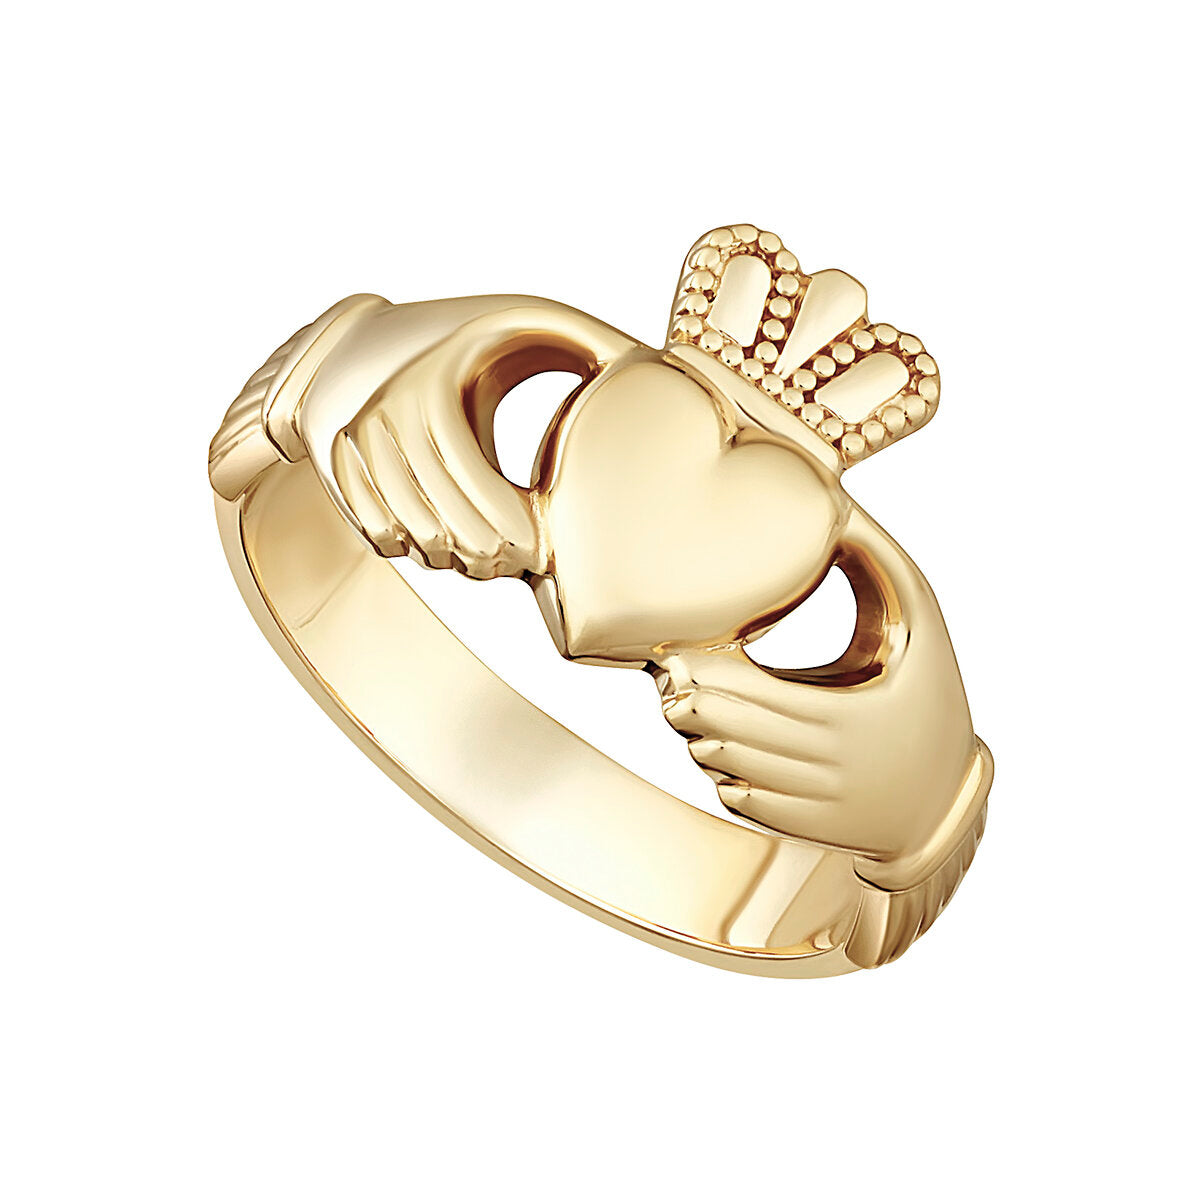 Men's 9ct Yellow Gold Claddagh Ring - Heavy